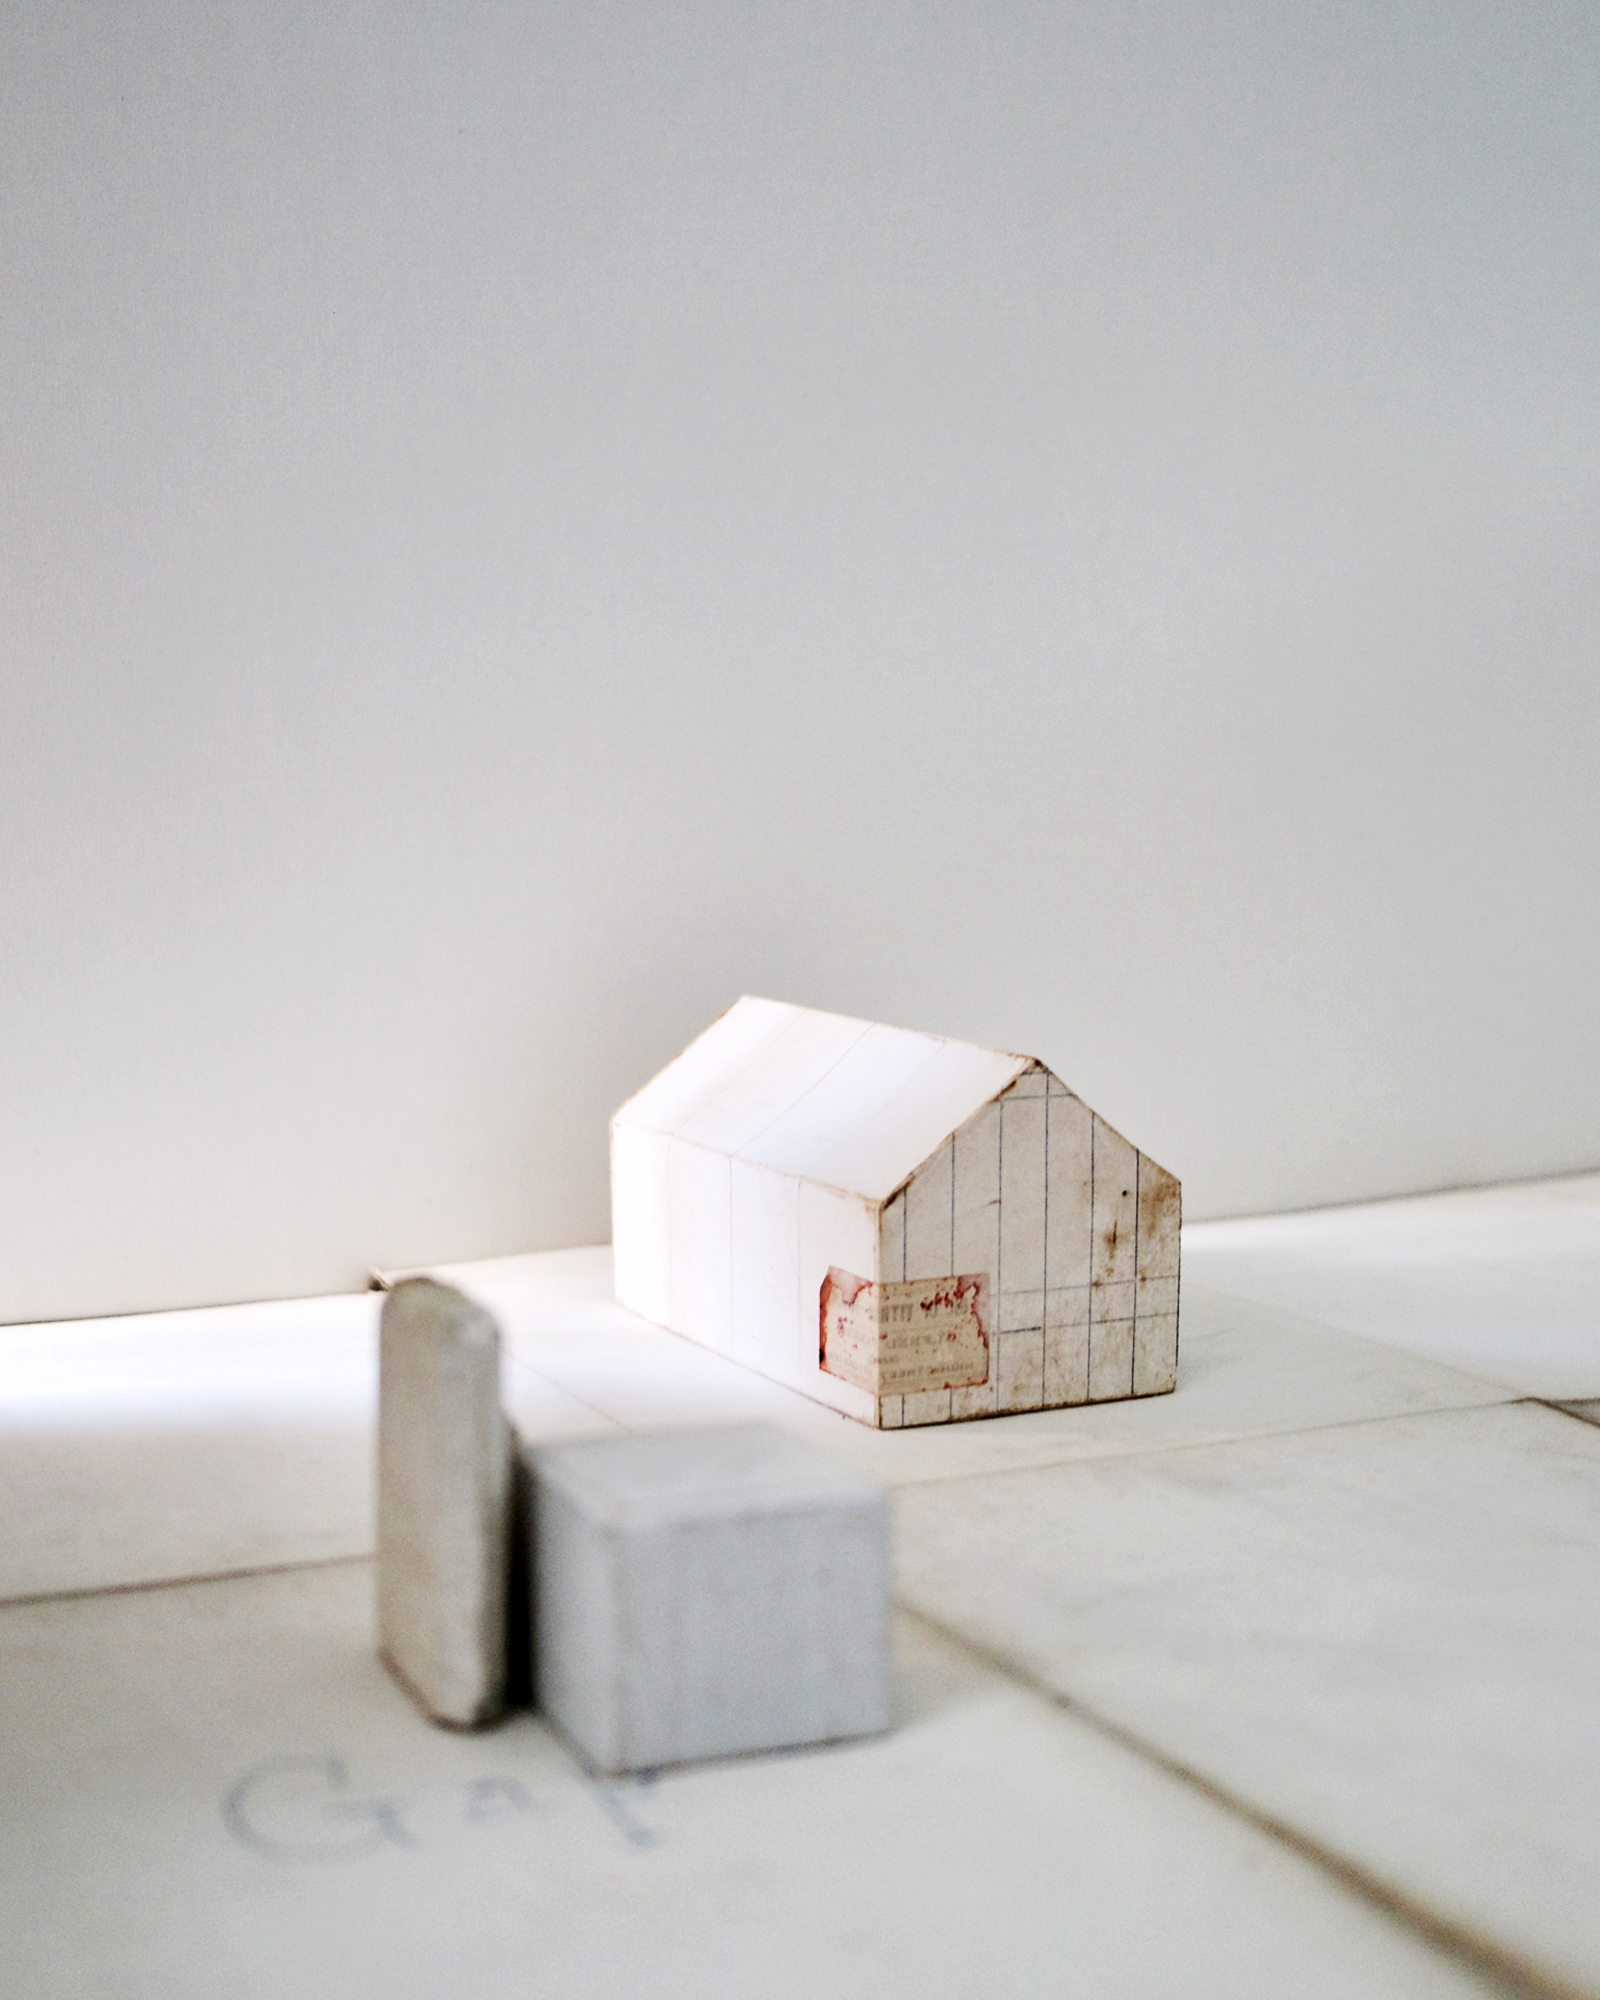 Cardboard pawlonia wood box made into a house with recycled materials by Michiko Iwata